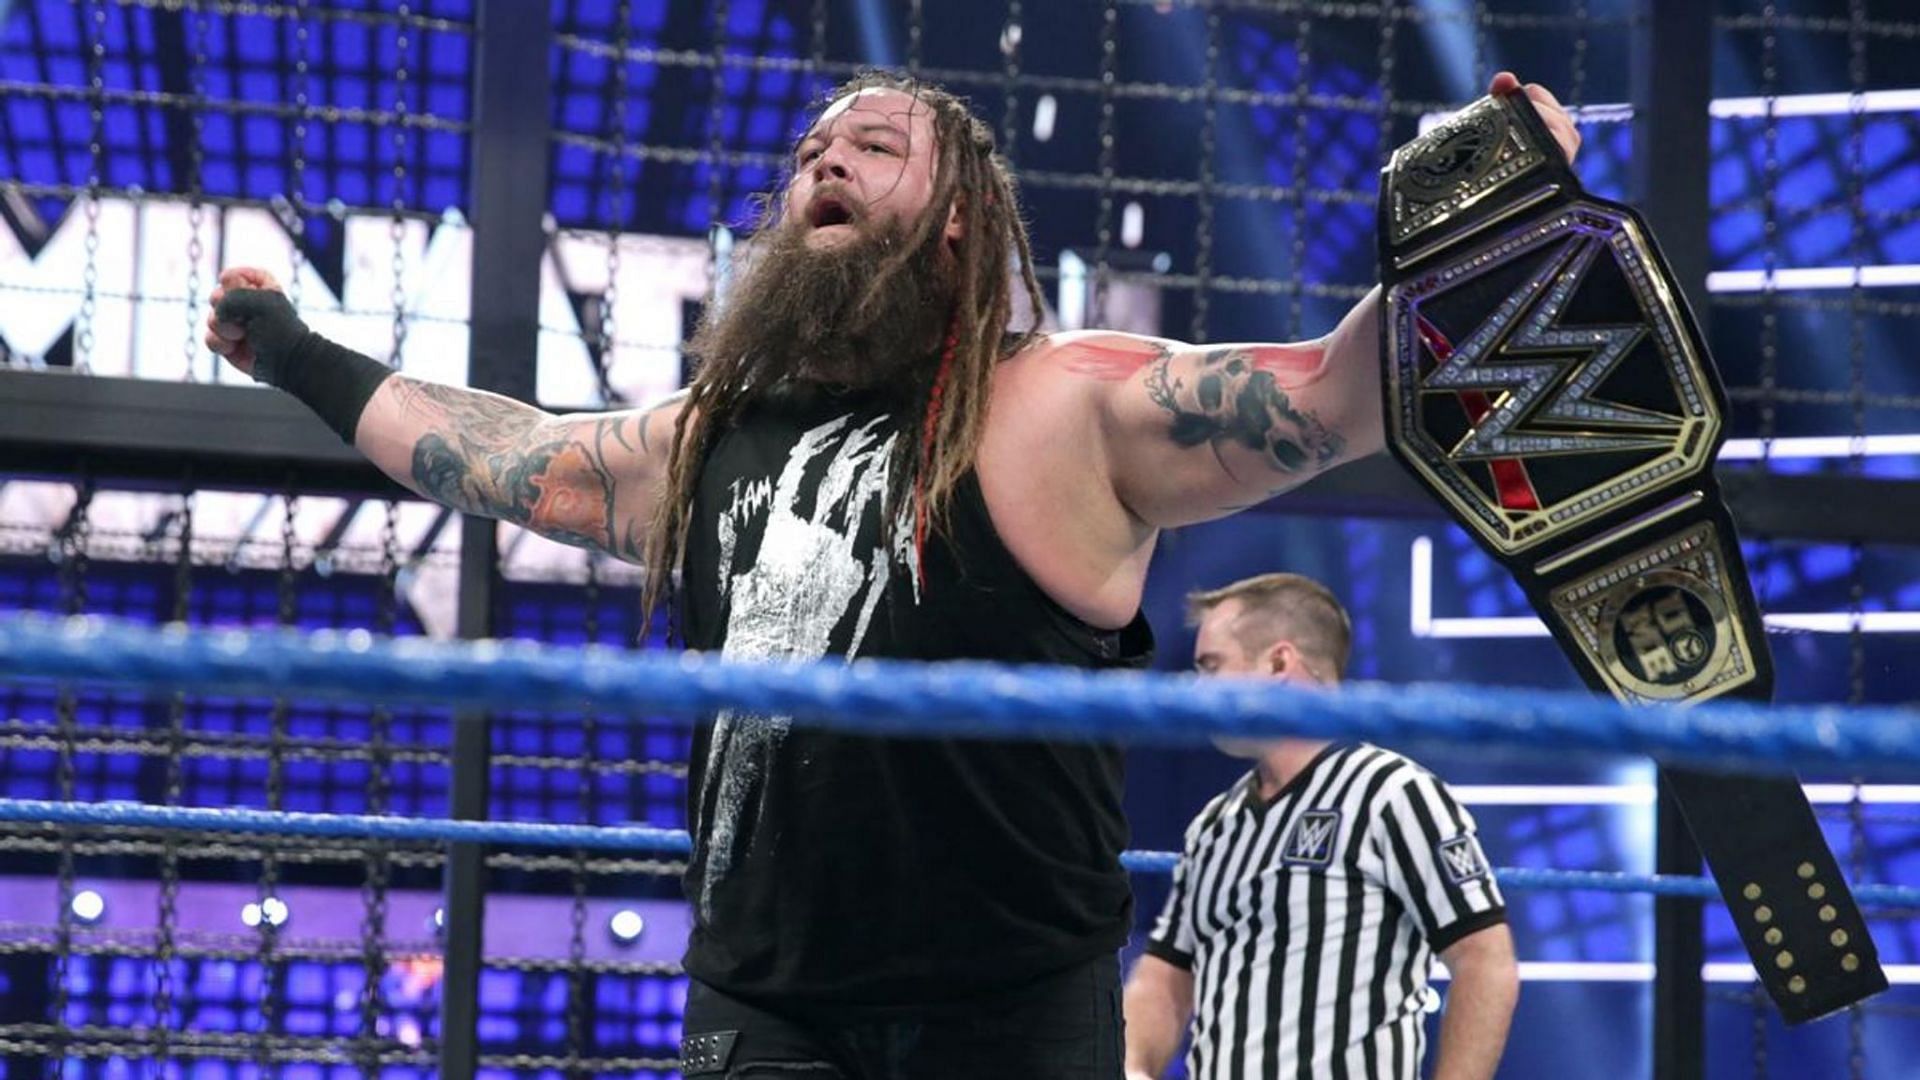 WWE fans are excited about the return of Bray Wyatt